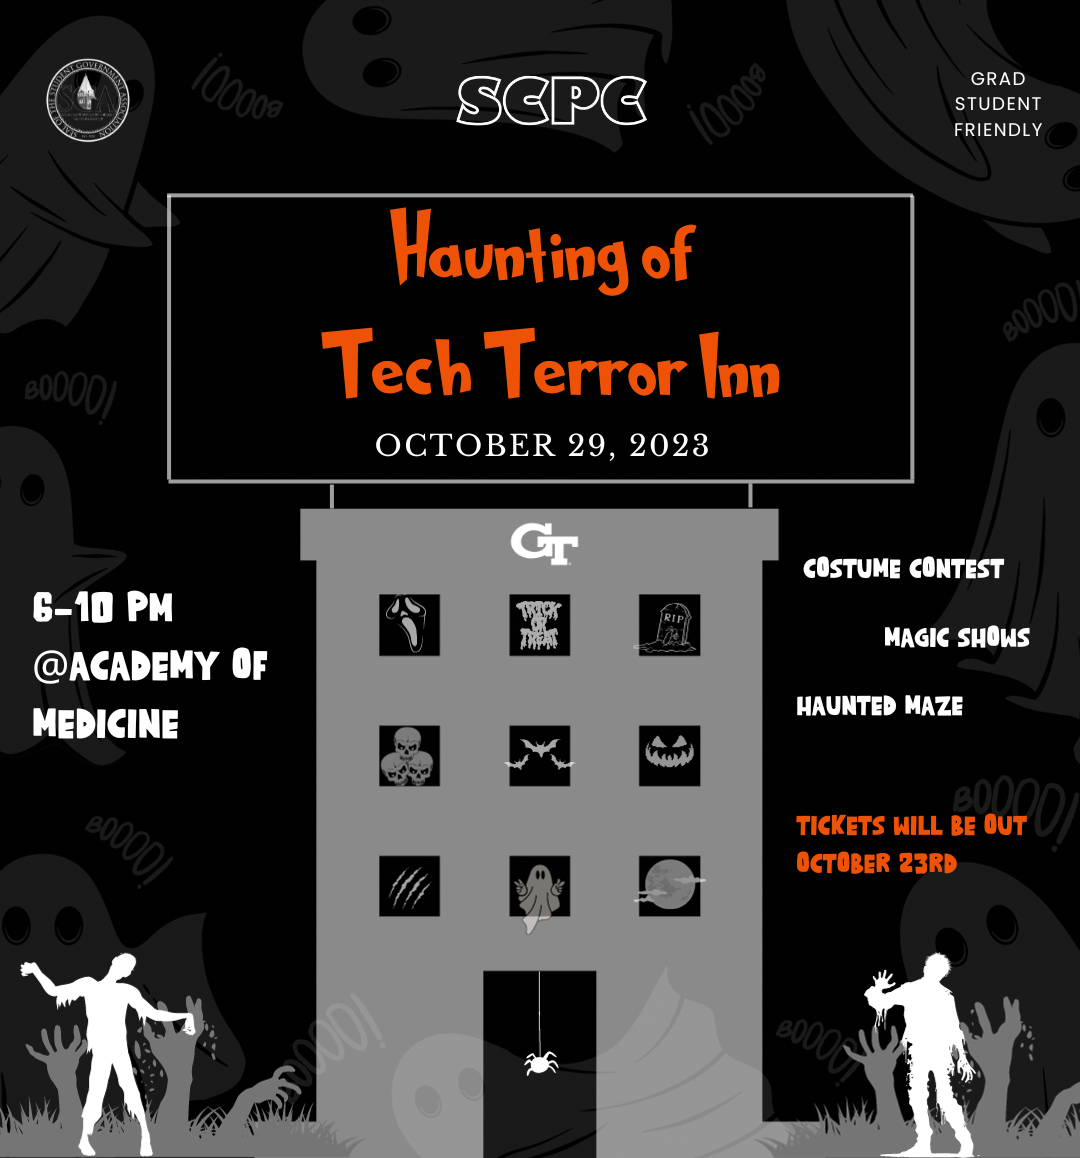 Boo-yah! Seeking out an eerie-sistble, scary, fun filled night? Mark your calendars because on October 29th from 6-10 PM SCPC presents Haunting of Tech Terror Inn for a spooktacular night. Carve out some time for a night of activities including a haunted maze, magic show, murder mystery, escape room, tarot card reading, and much more! Dress up in your scariest Halloween costume and come down for a skeleTON of fun…

Doors open at 6 PM on Sunday, October 29th at the Academy of Medicine (875 W Peachtree St N